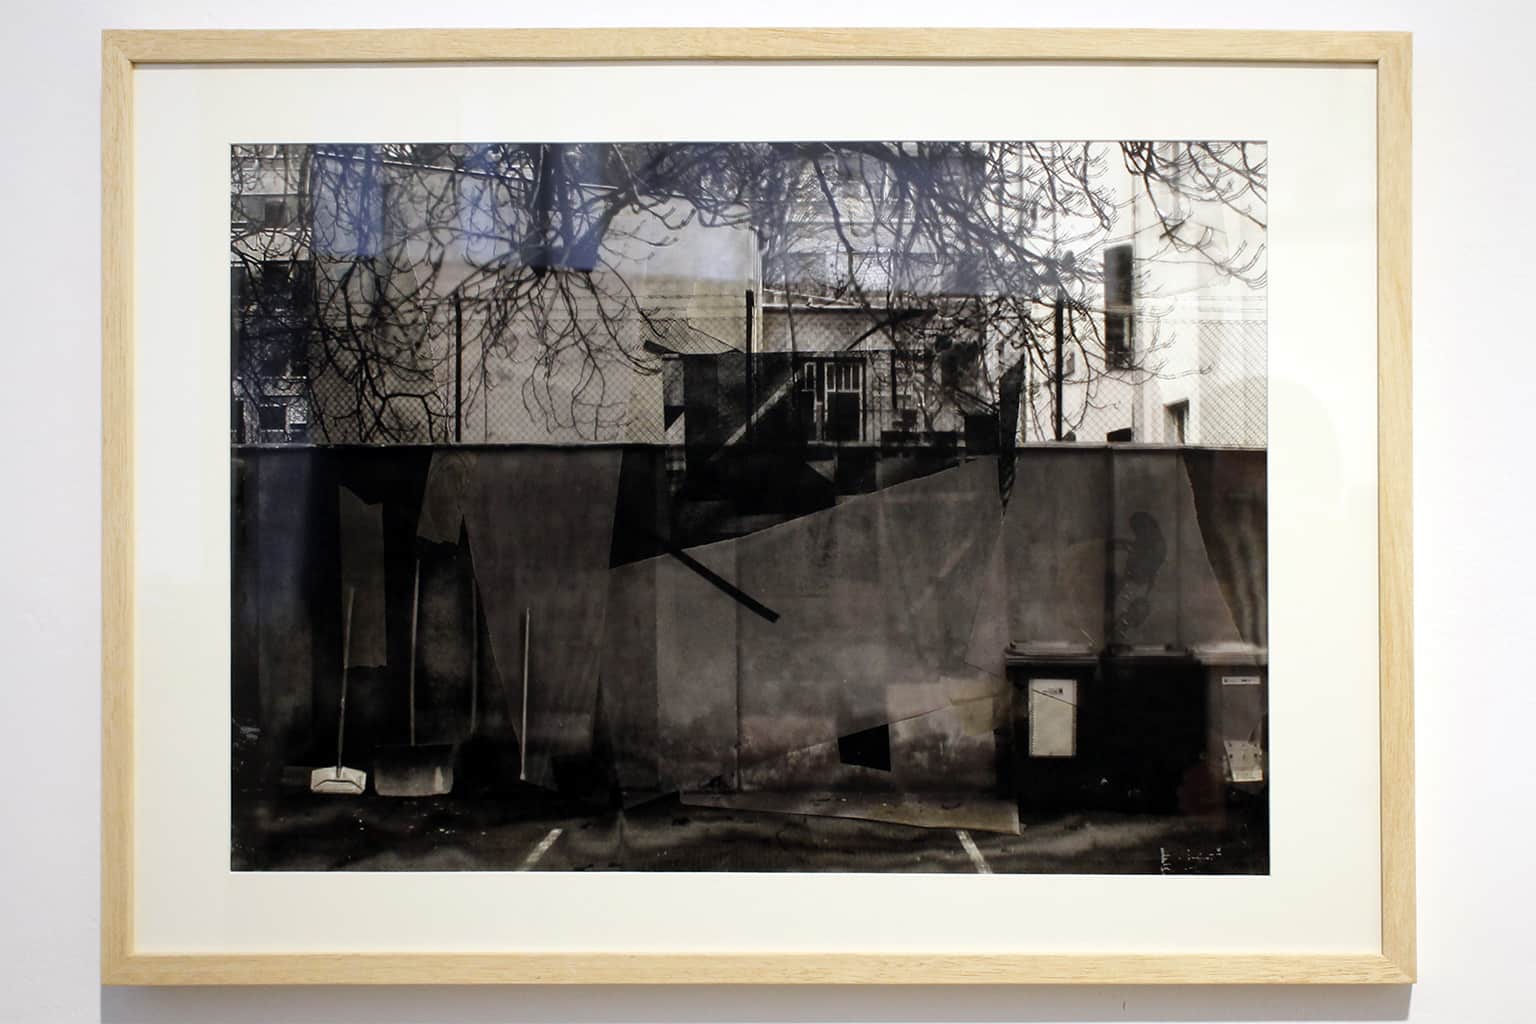 CLEMENS BEHR | installation in the yard (revisited), 2015 | screenprint, paper collage | cm. 50 x 70 (framed)